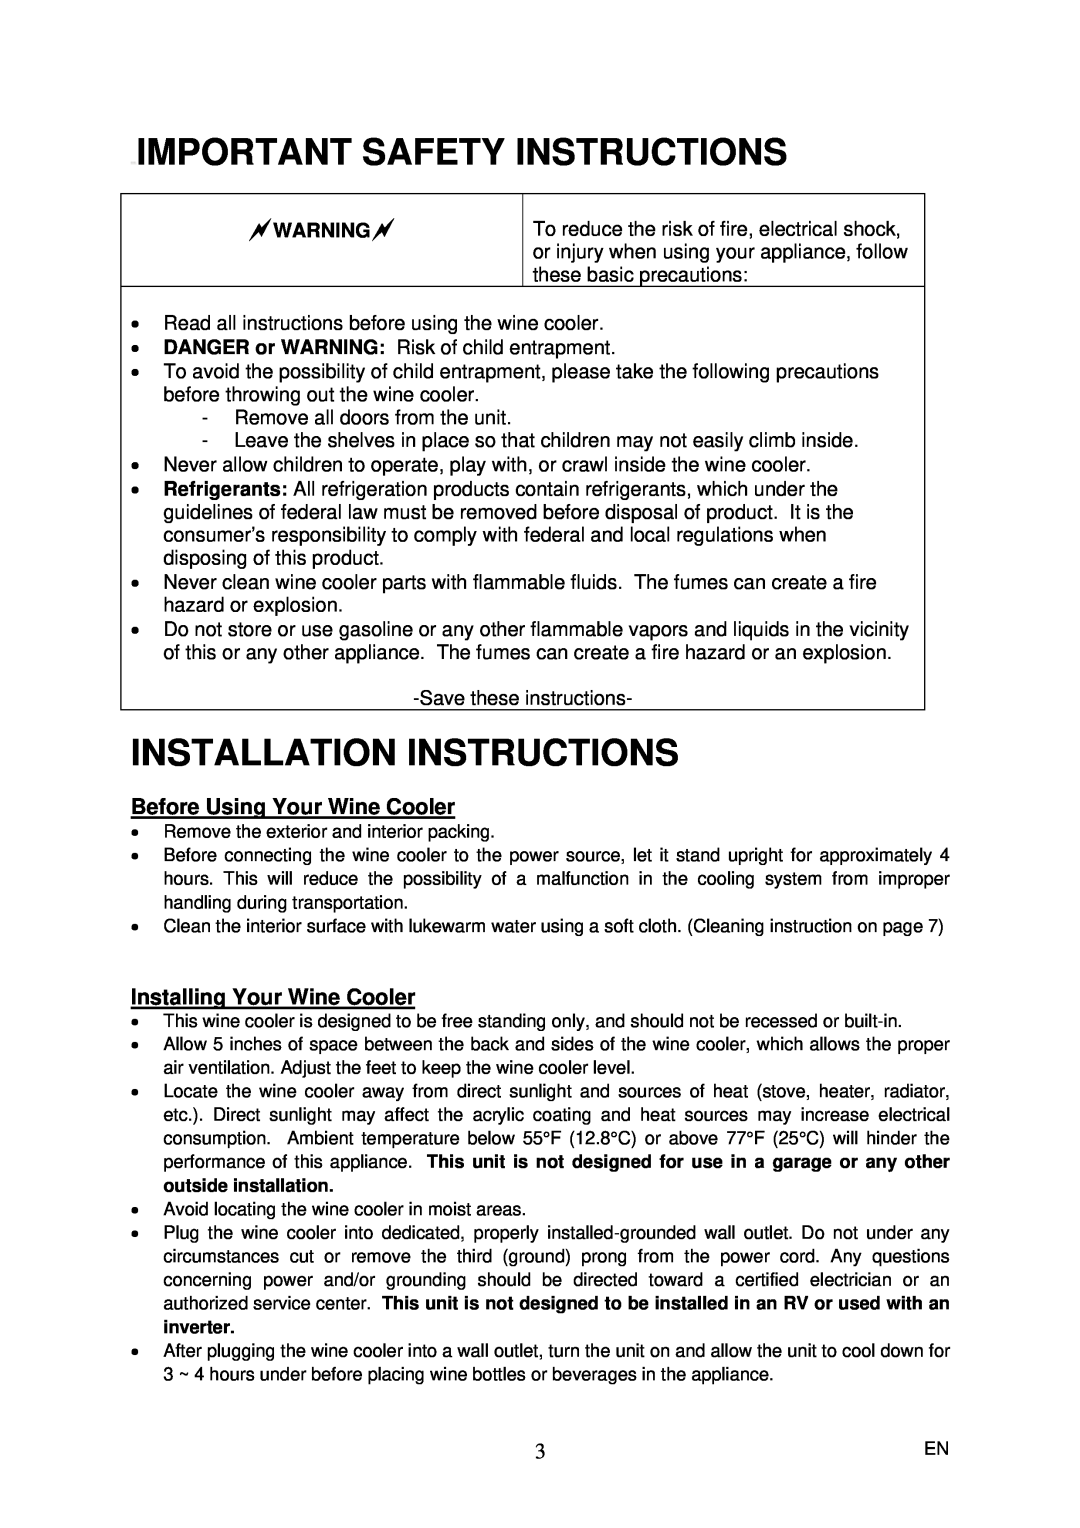 Magic Chef MCWC45A Important Safety Instructions, Installation Instructions, Before Using Your Wine Cooler 